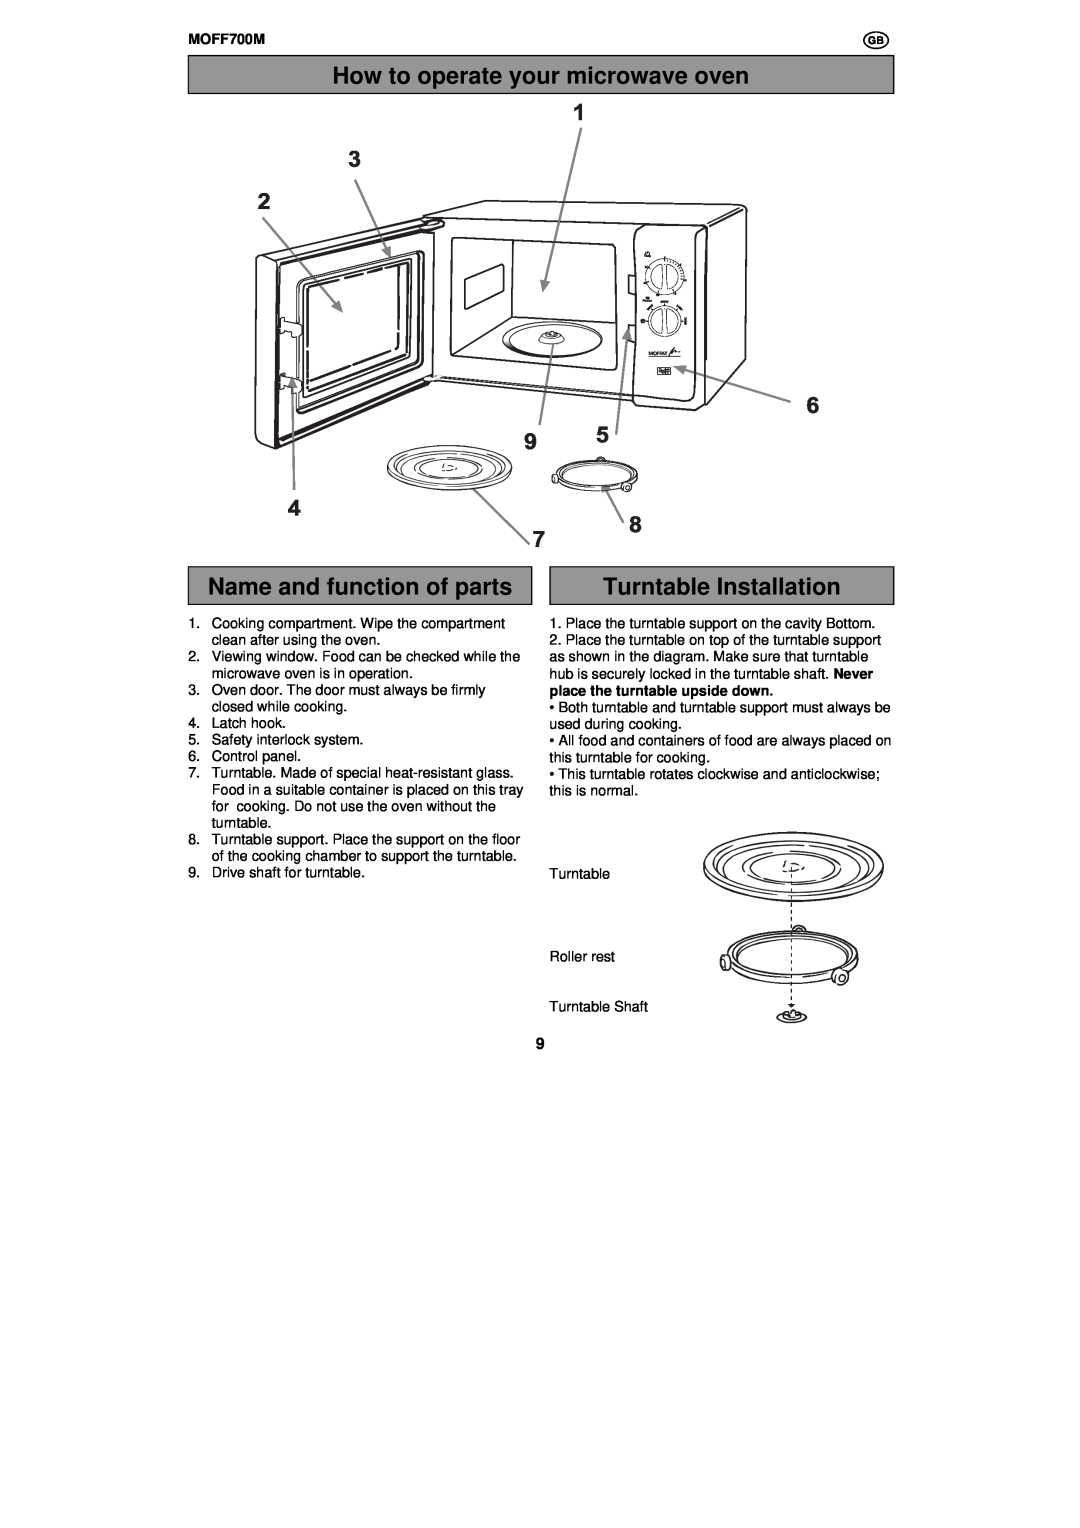 Moffat MOFF700M, MOFF700W user manual How to operate your microwave oven, Name and function of parts, Turntable Installation 